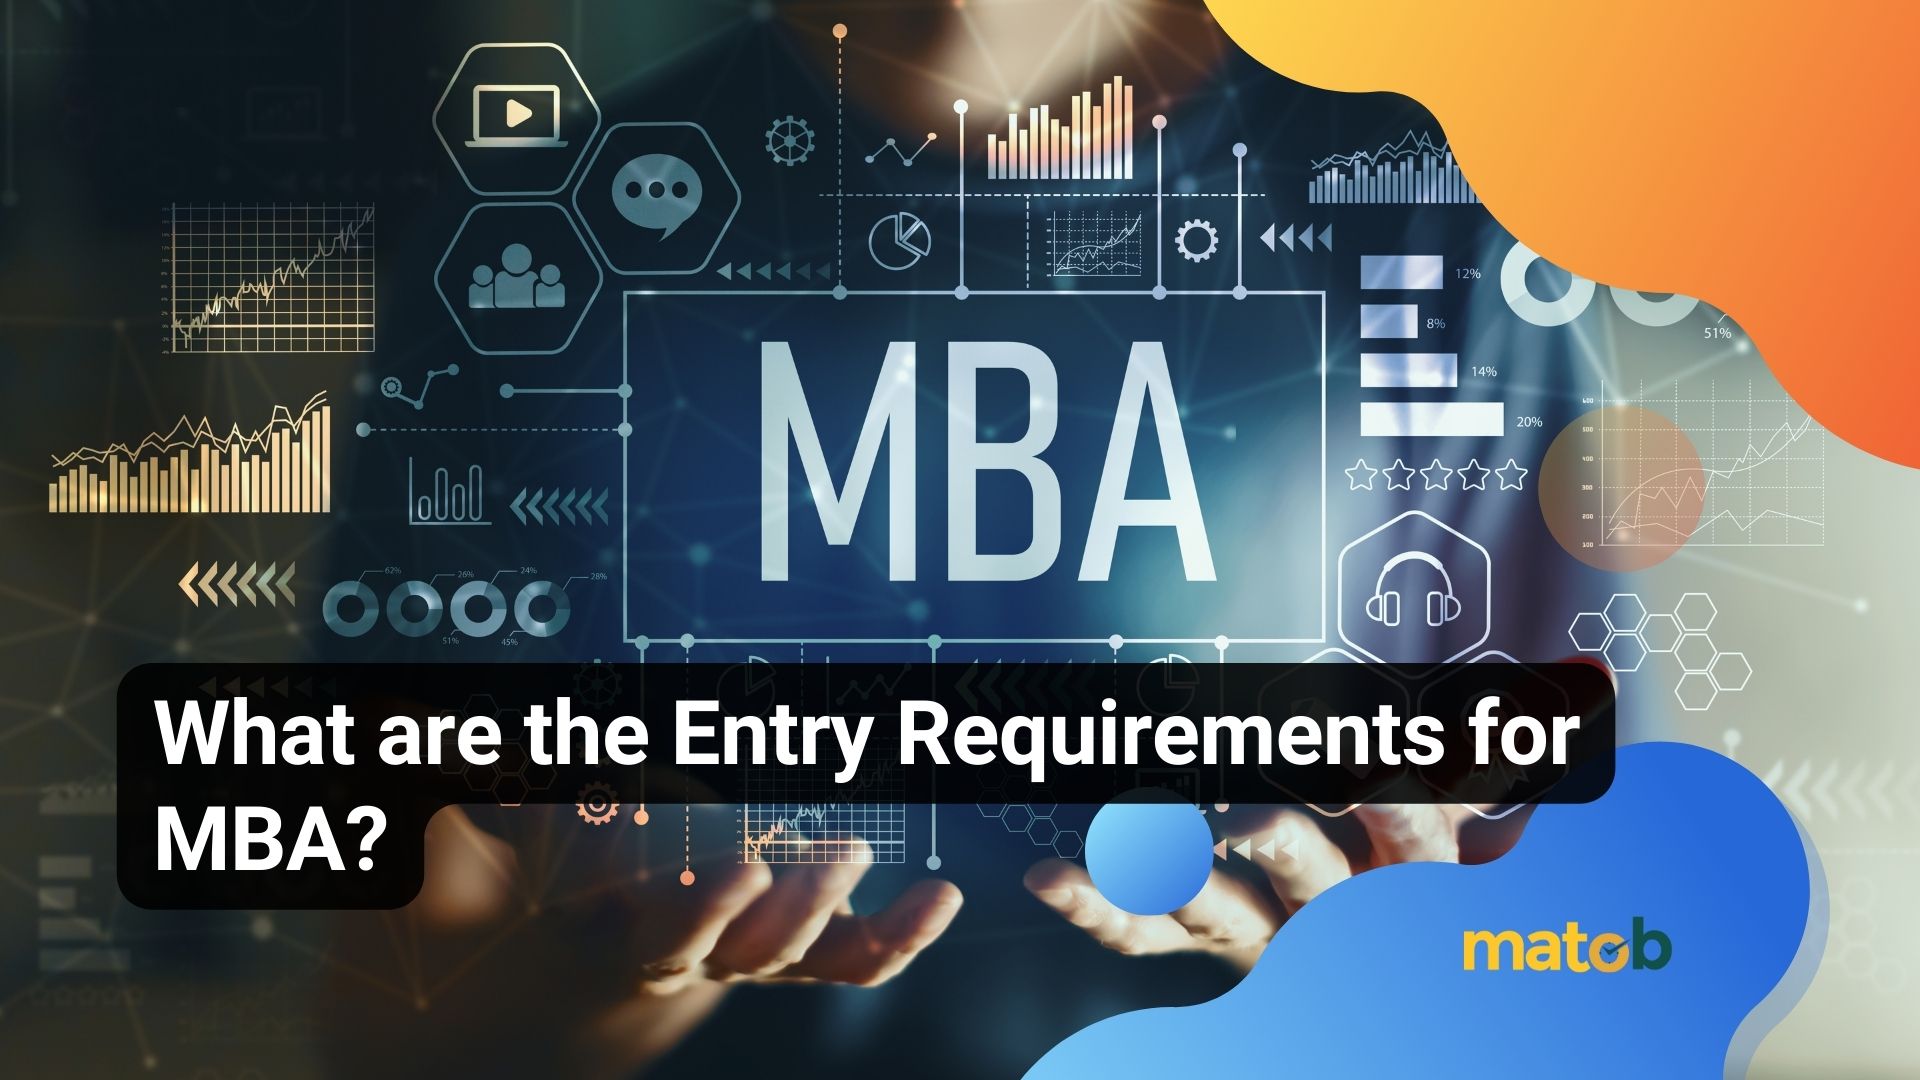 What are the Entry Requirements for MBA?